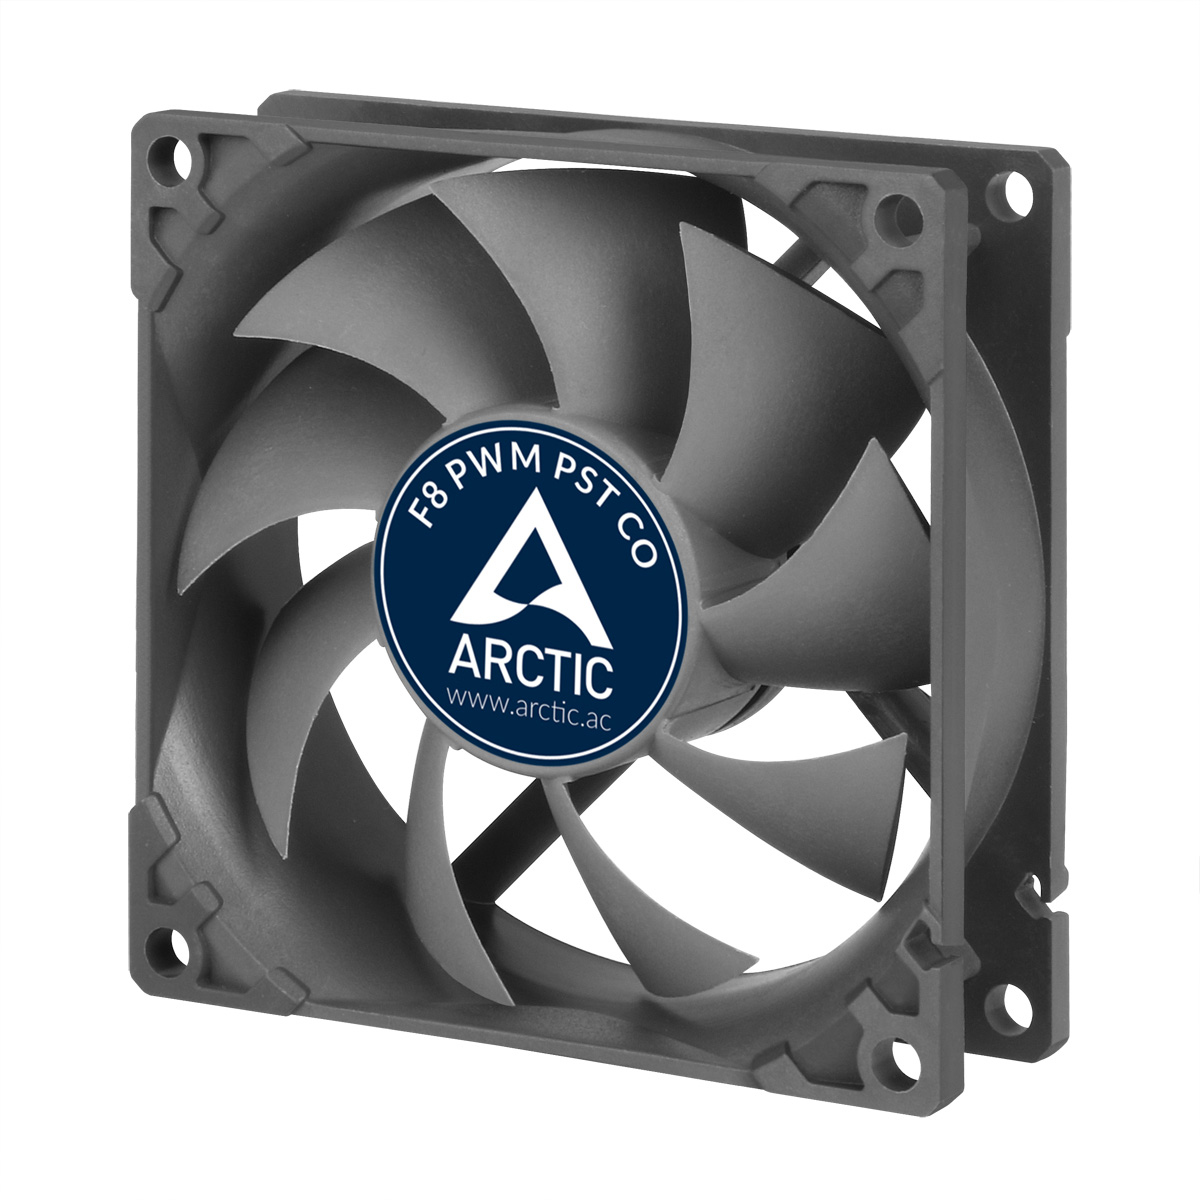 ARCTIC F8 PWM CO CONTINUOUS-OPERATION DUAL-BALL BEARING 80MM CASE FAN WITH NOISE